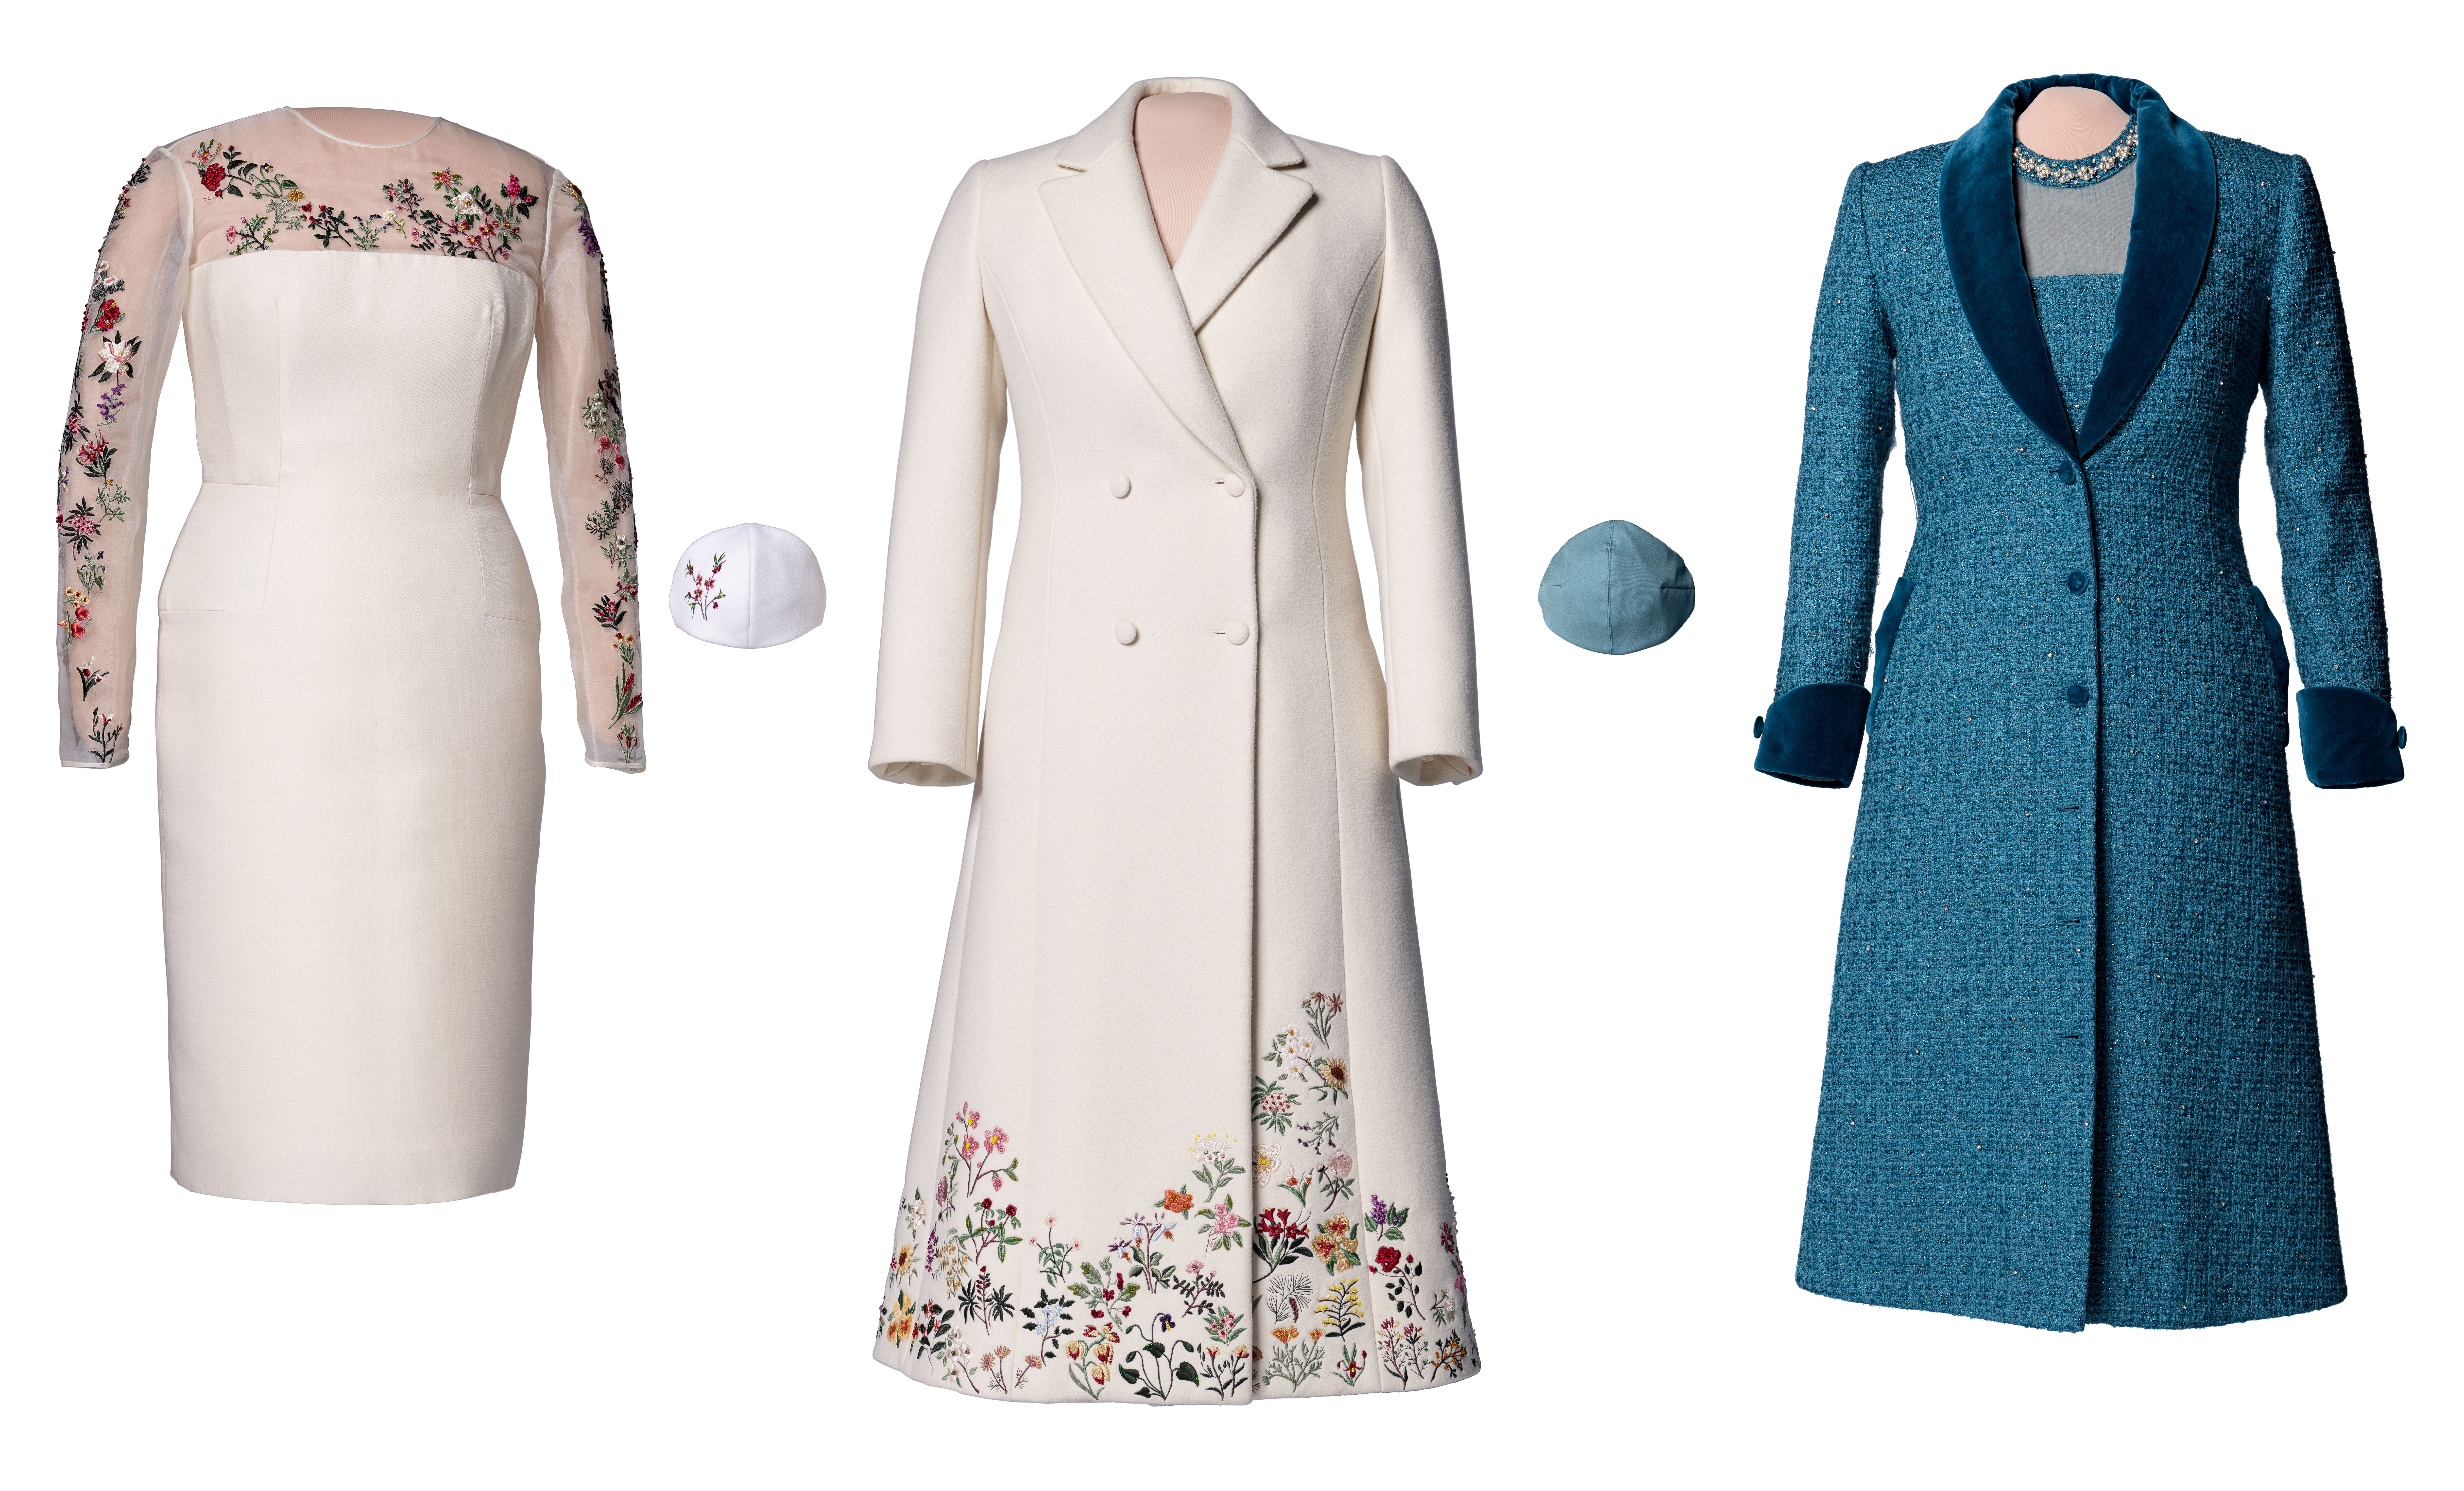 A white dress, white overcoat and blue coat ensemble with matching accessories